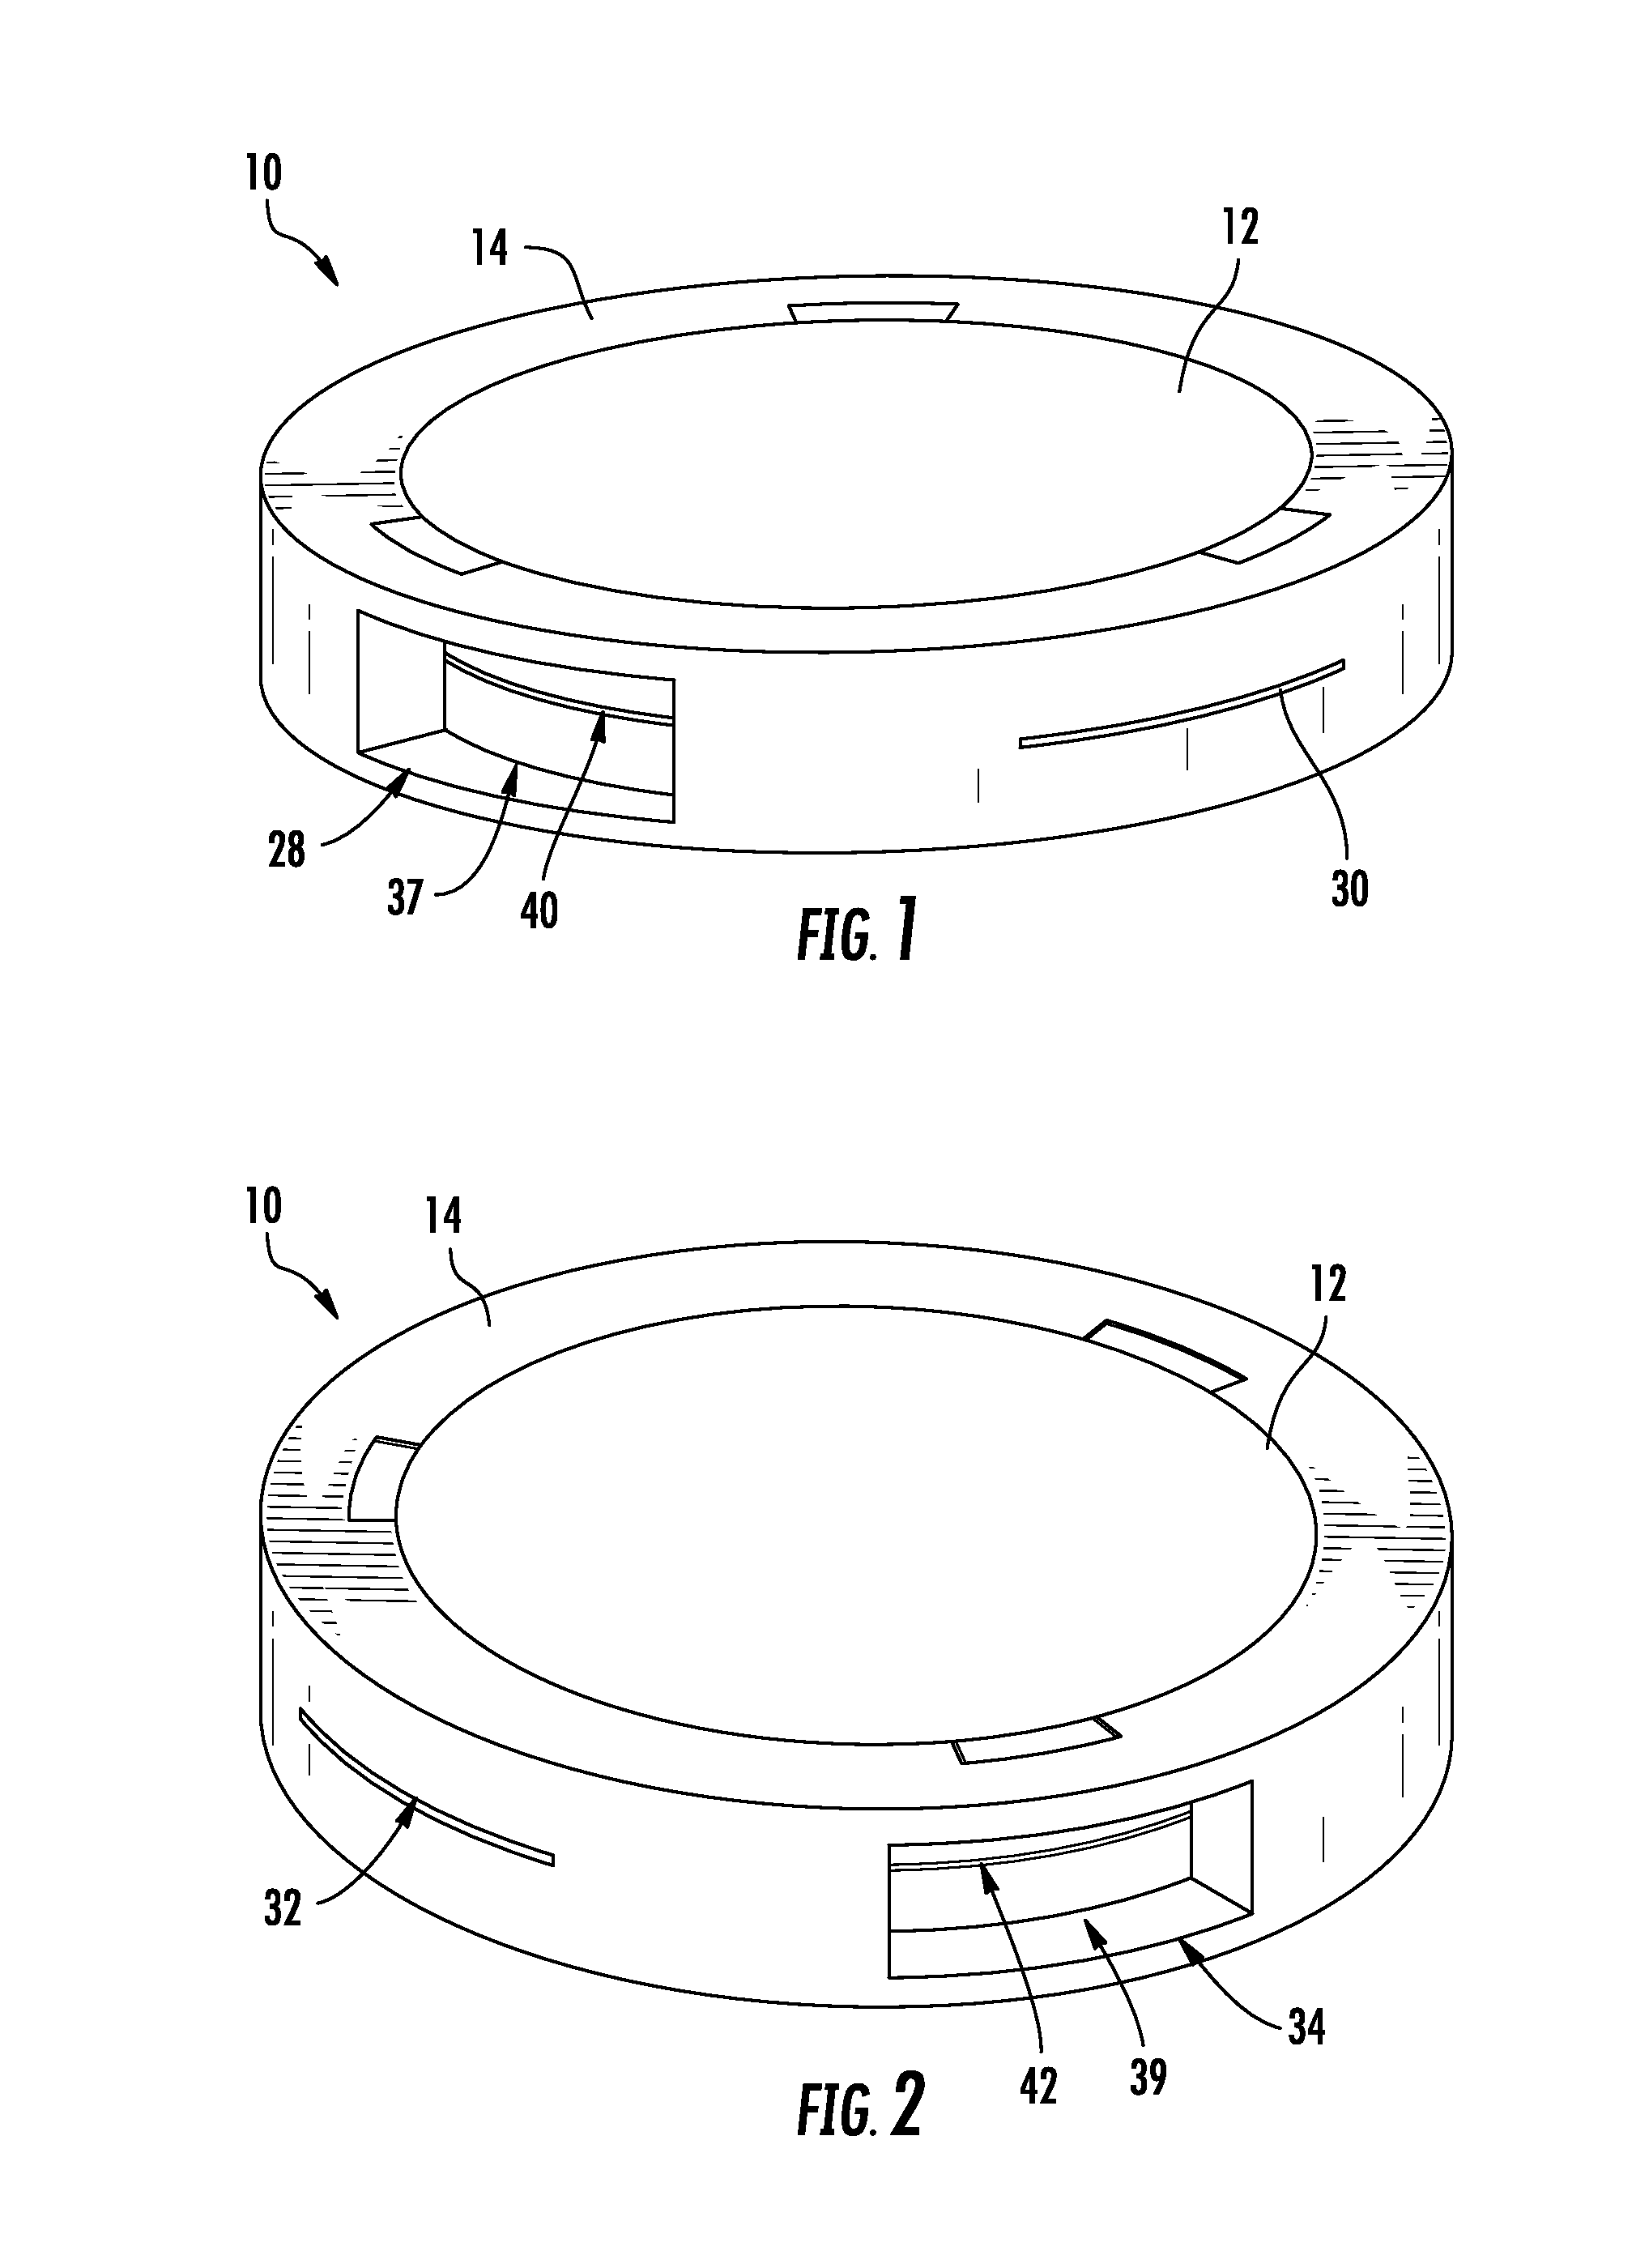 System and method for rotational transfer of articles between vacuum and non-vacuum environments